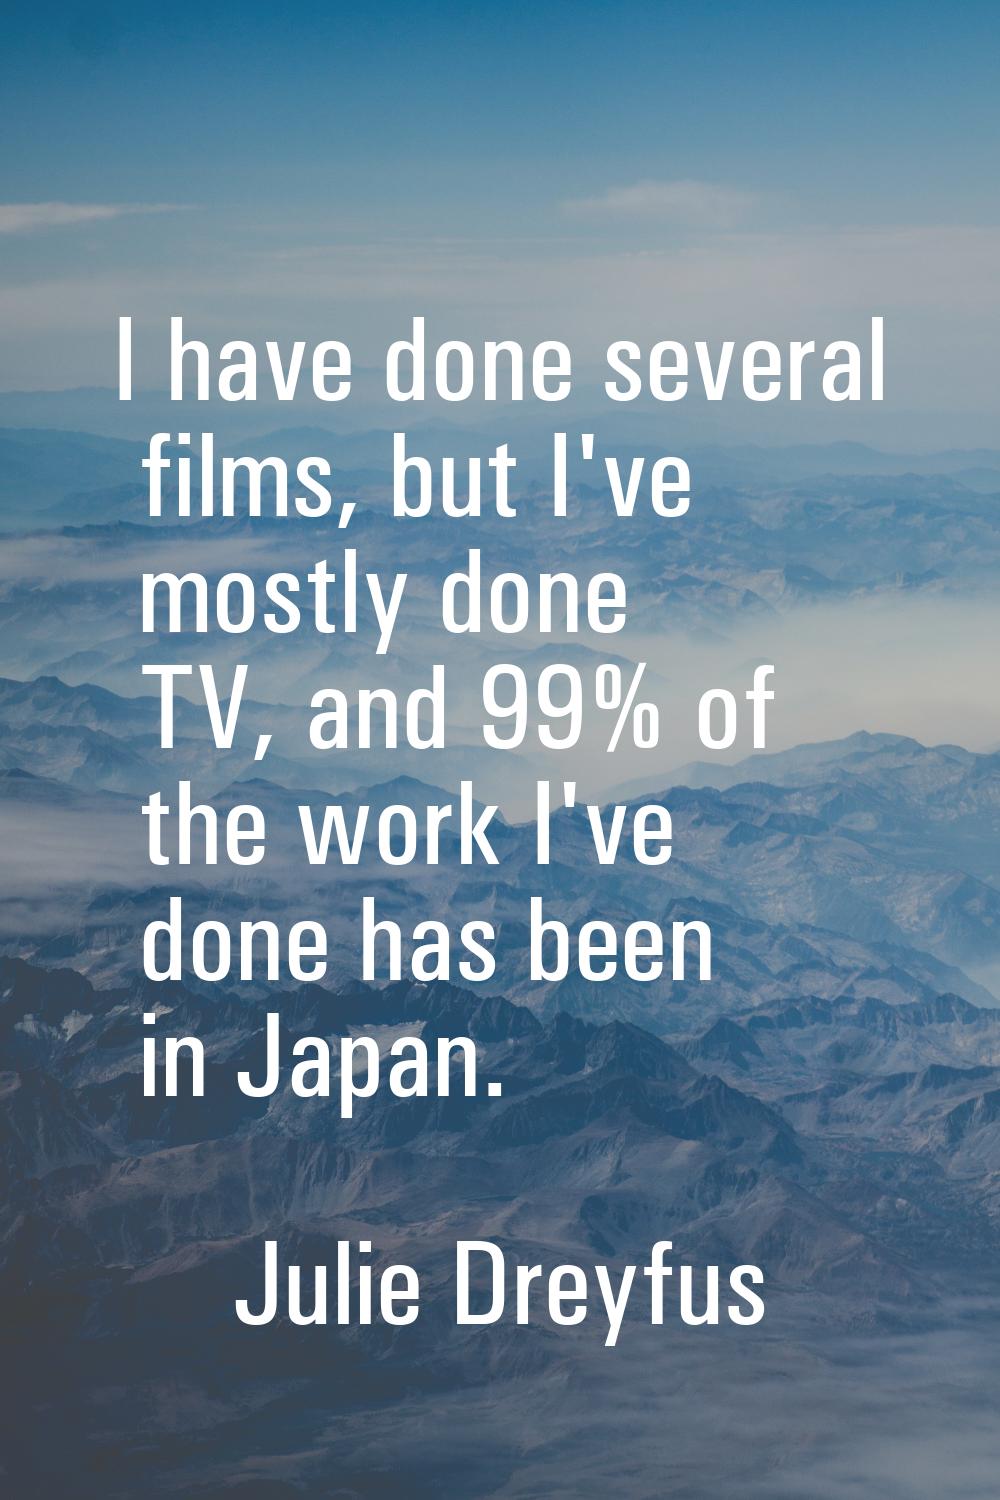 I have done several films, but I've mostly done TV, and 99% of the work I've done has been in Japan